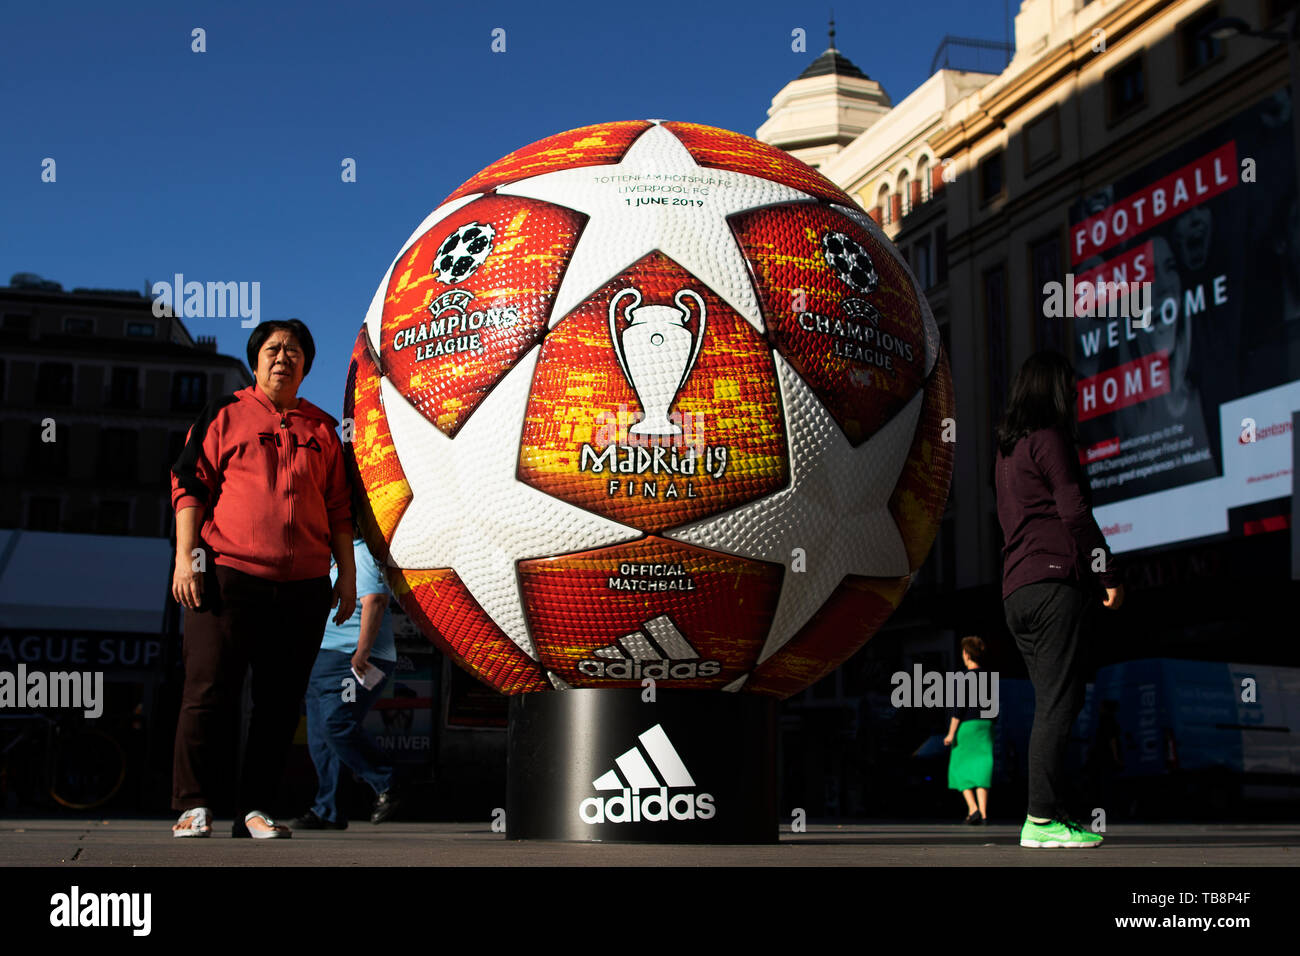 31st May 2019; Wanda Metropolitano stadium, Madrid, Spain; UEFA Champions  league final; Fans have pictures with the giant Madrid 19 replica match  ball on display in central Madrid Stock Photo - Alamy